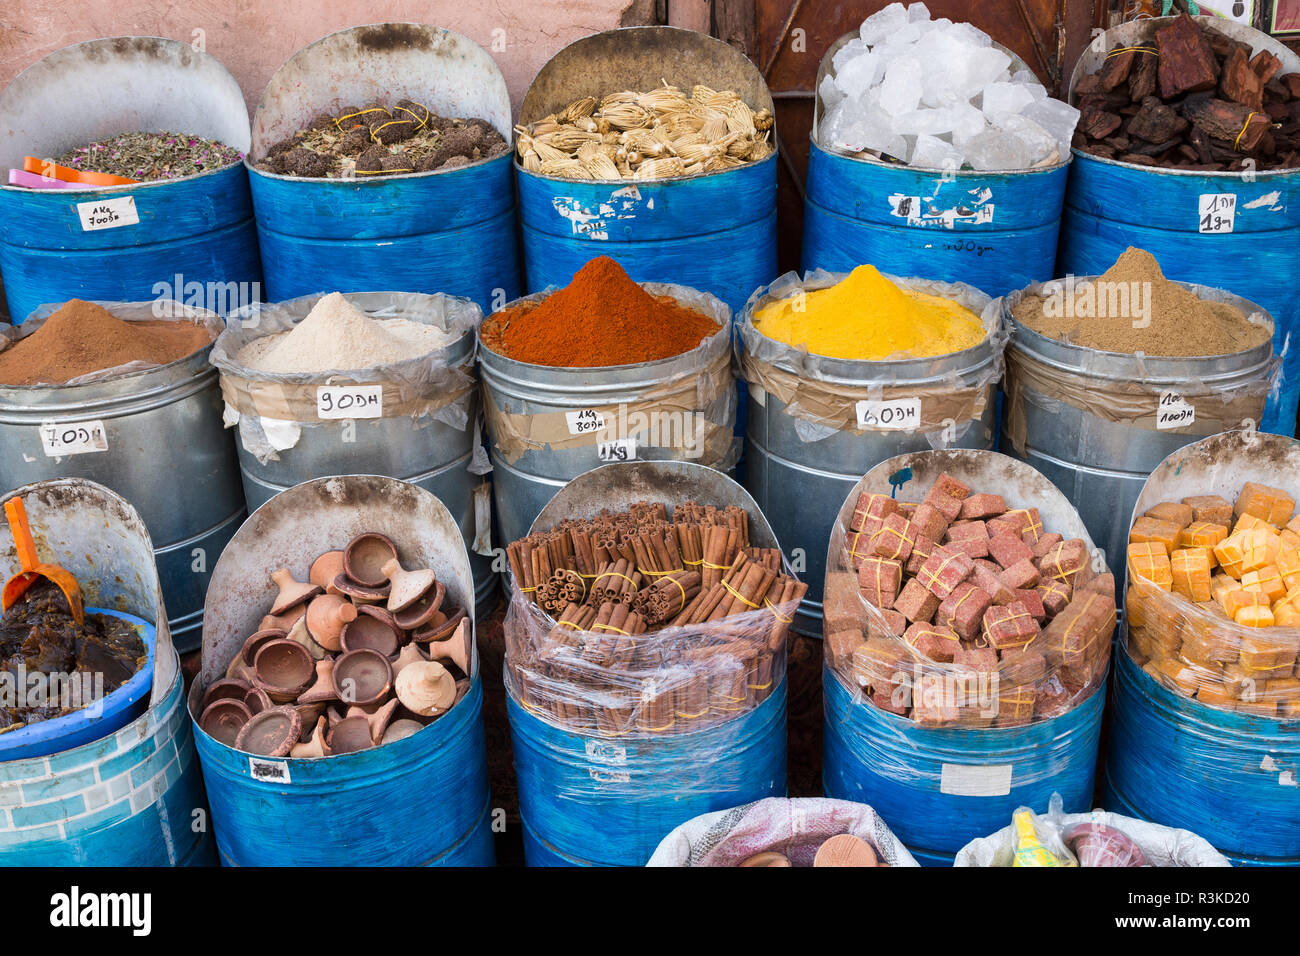 Morocco. Spices, soaps, salts and other products for sale at a shop. Stock Photo